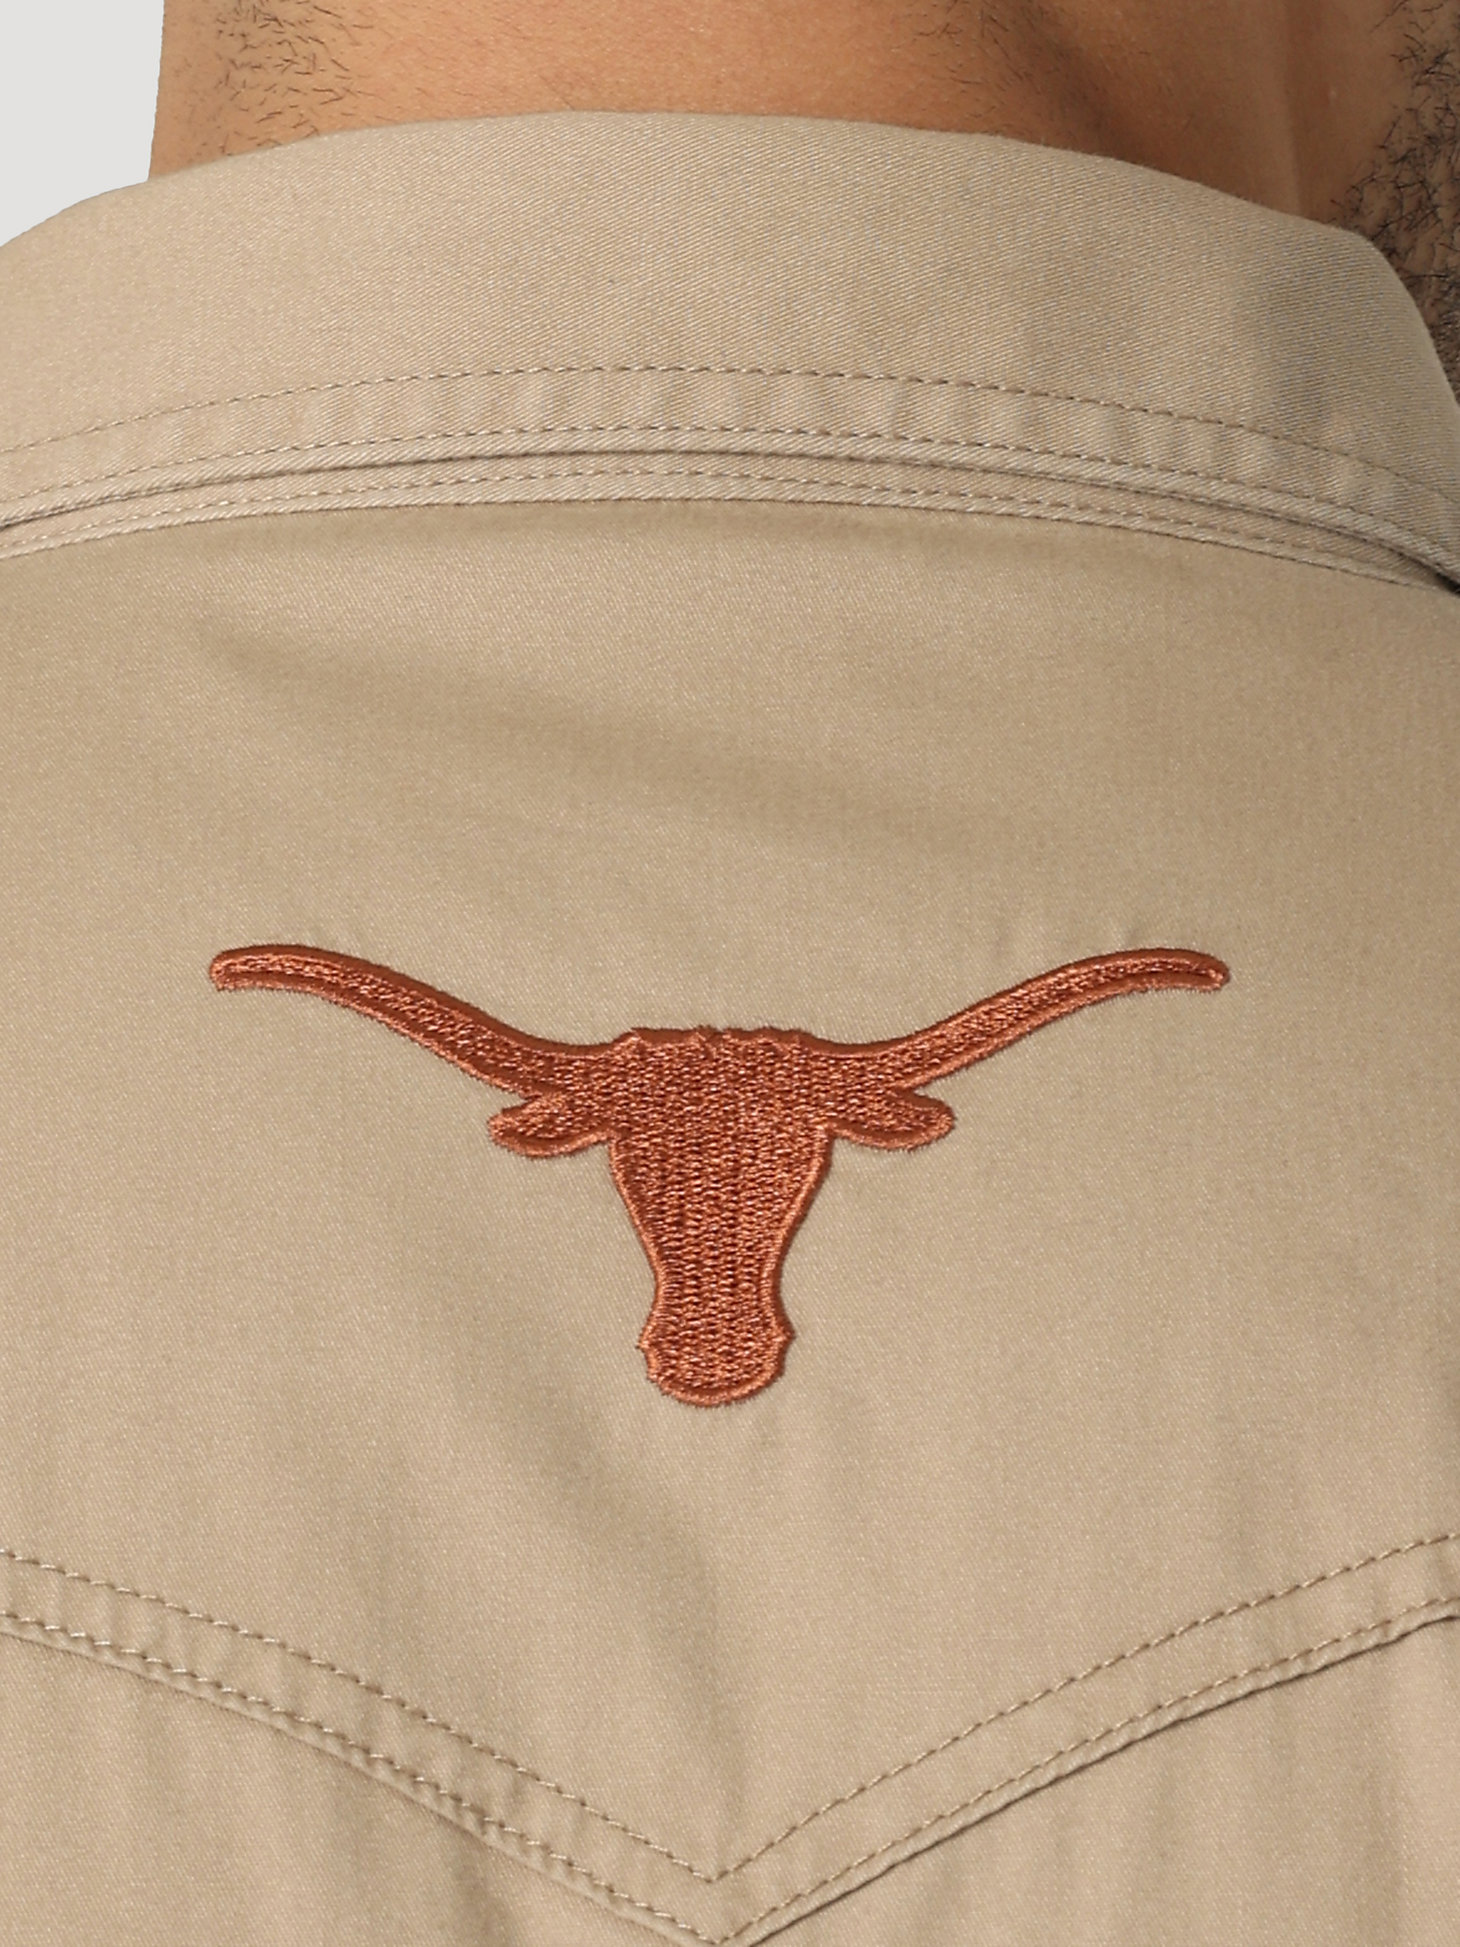 Wrangler Collegiate Embroidered Twill Western Snap Shirt in University of Texas alternative view 4